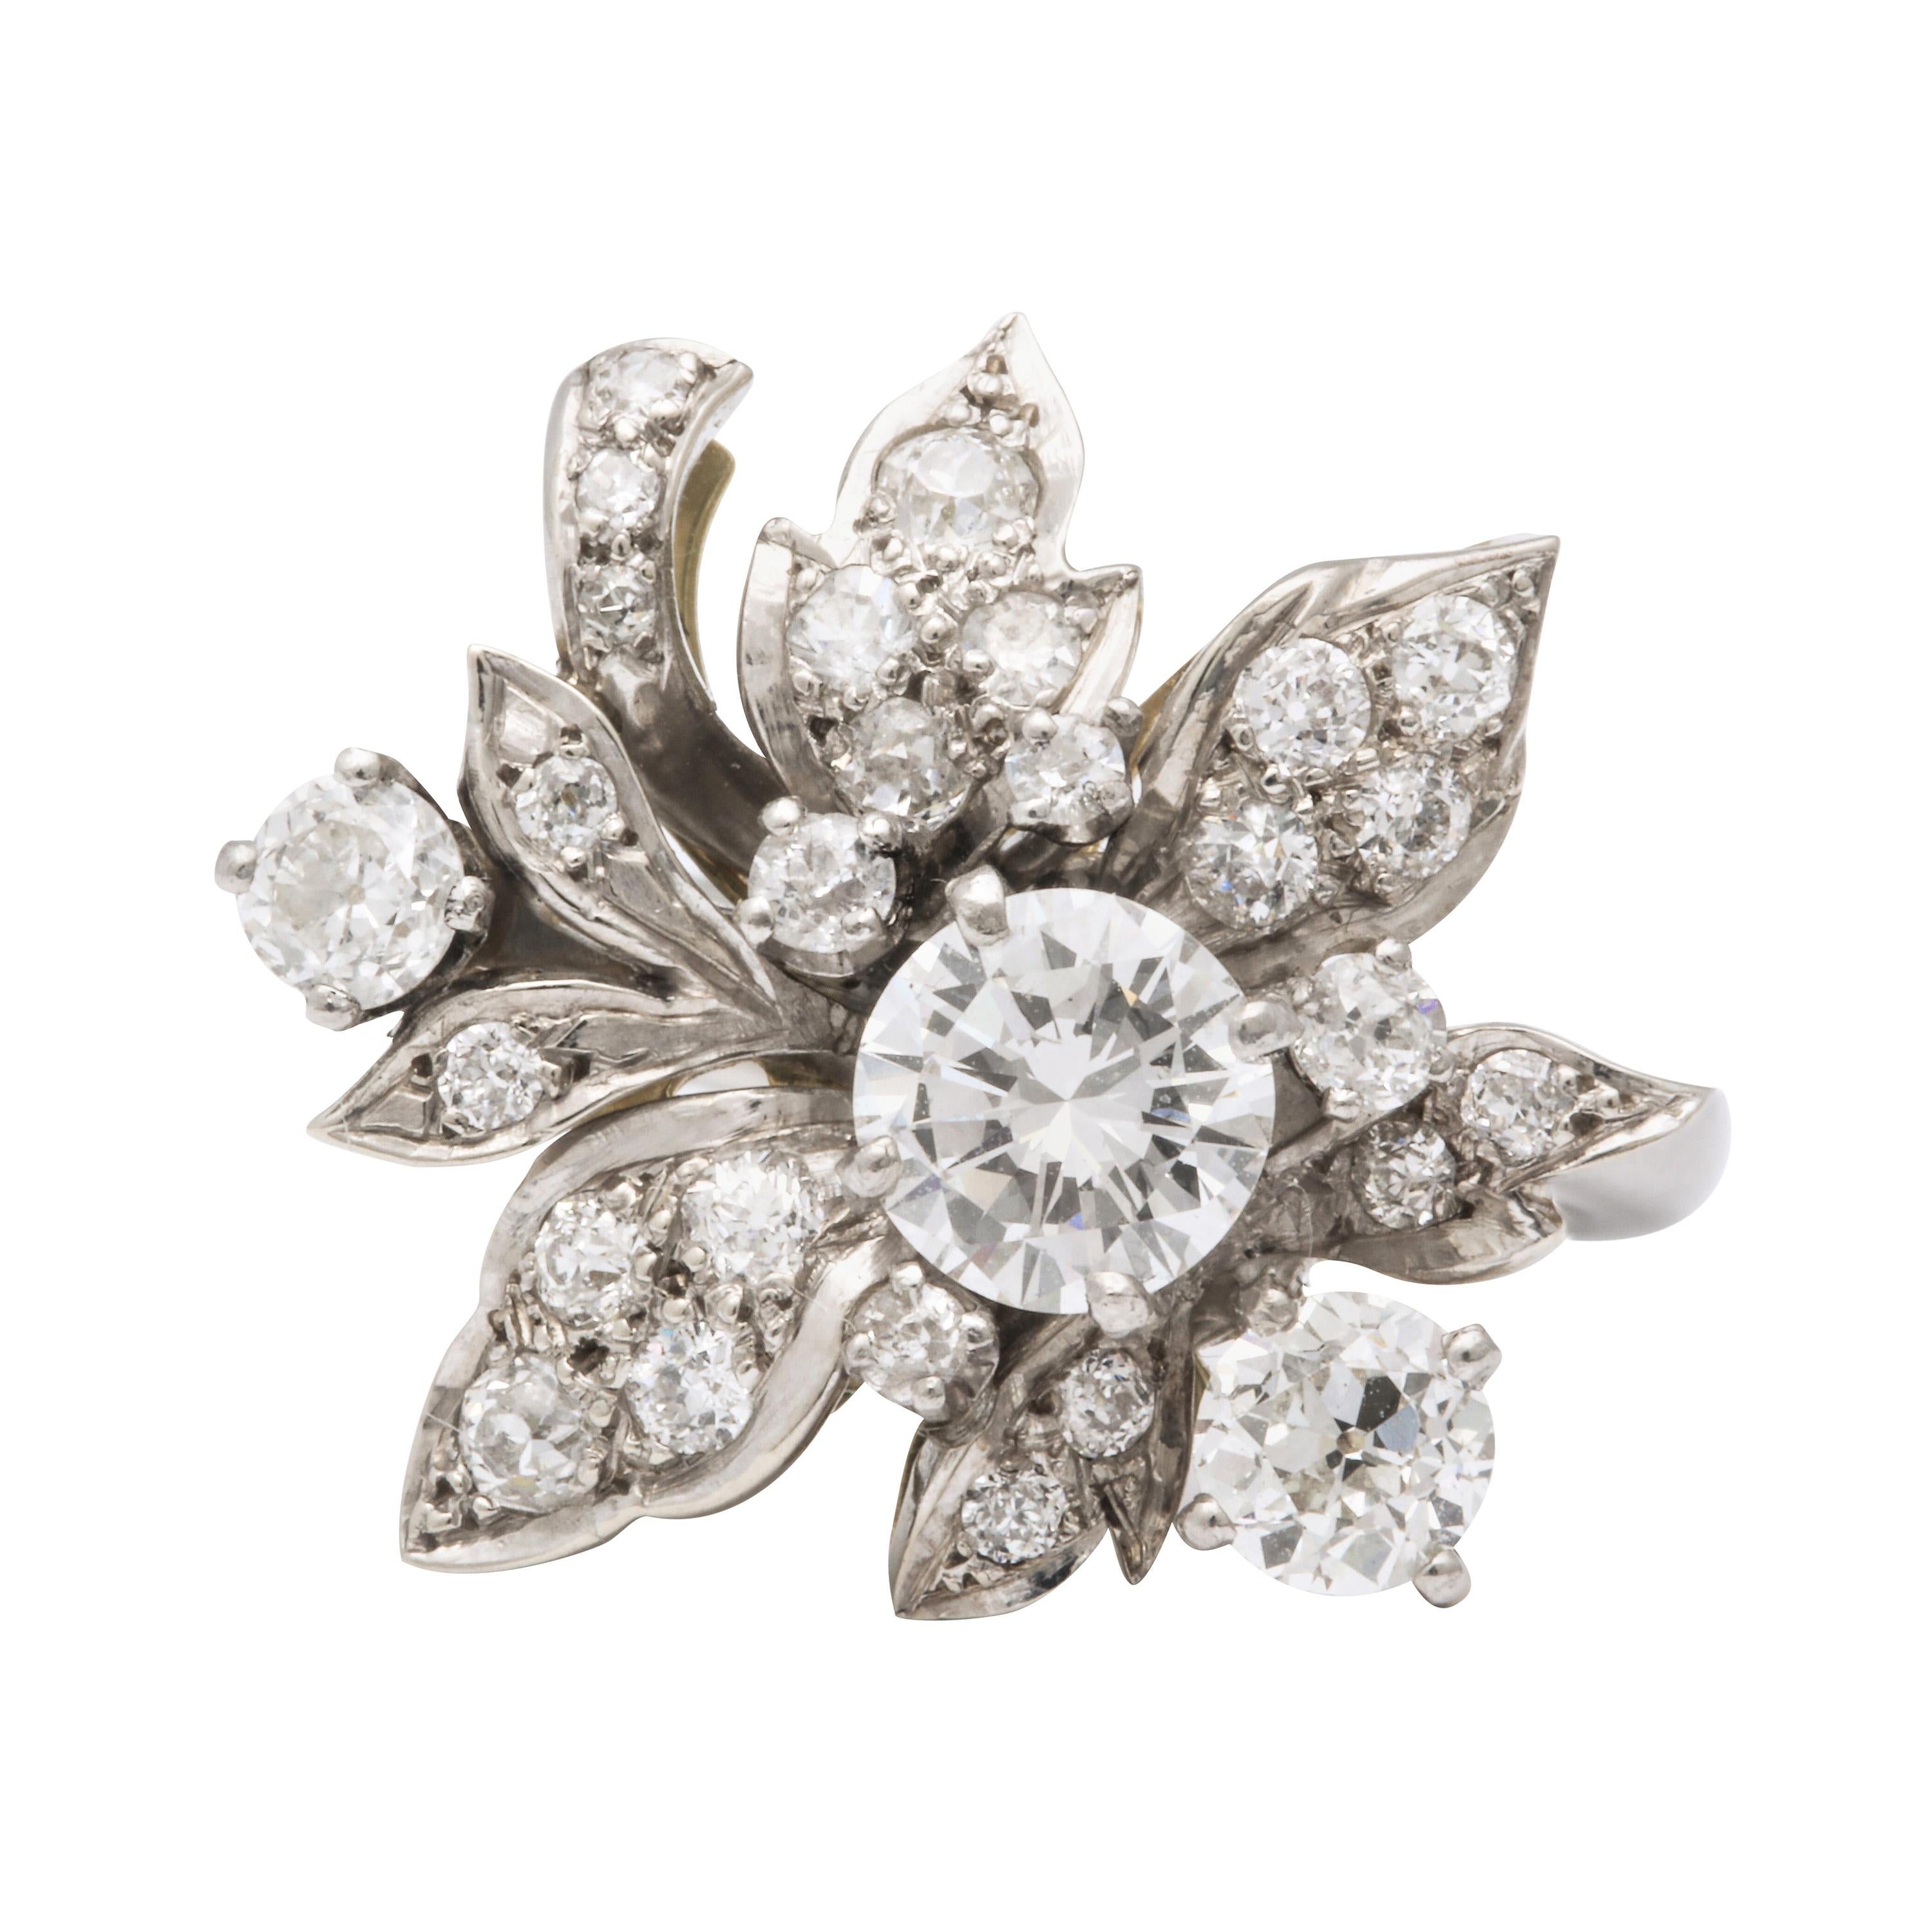 A beautiful  articulated floral grouping of diamonds with a center stone approximately .95 cts along with a variety of  sizes forming petals  and leaves.
This is an amazingly lovely ring that can be worn all the time.
The total of diamonds is 3.5